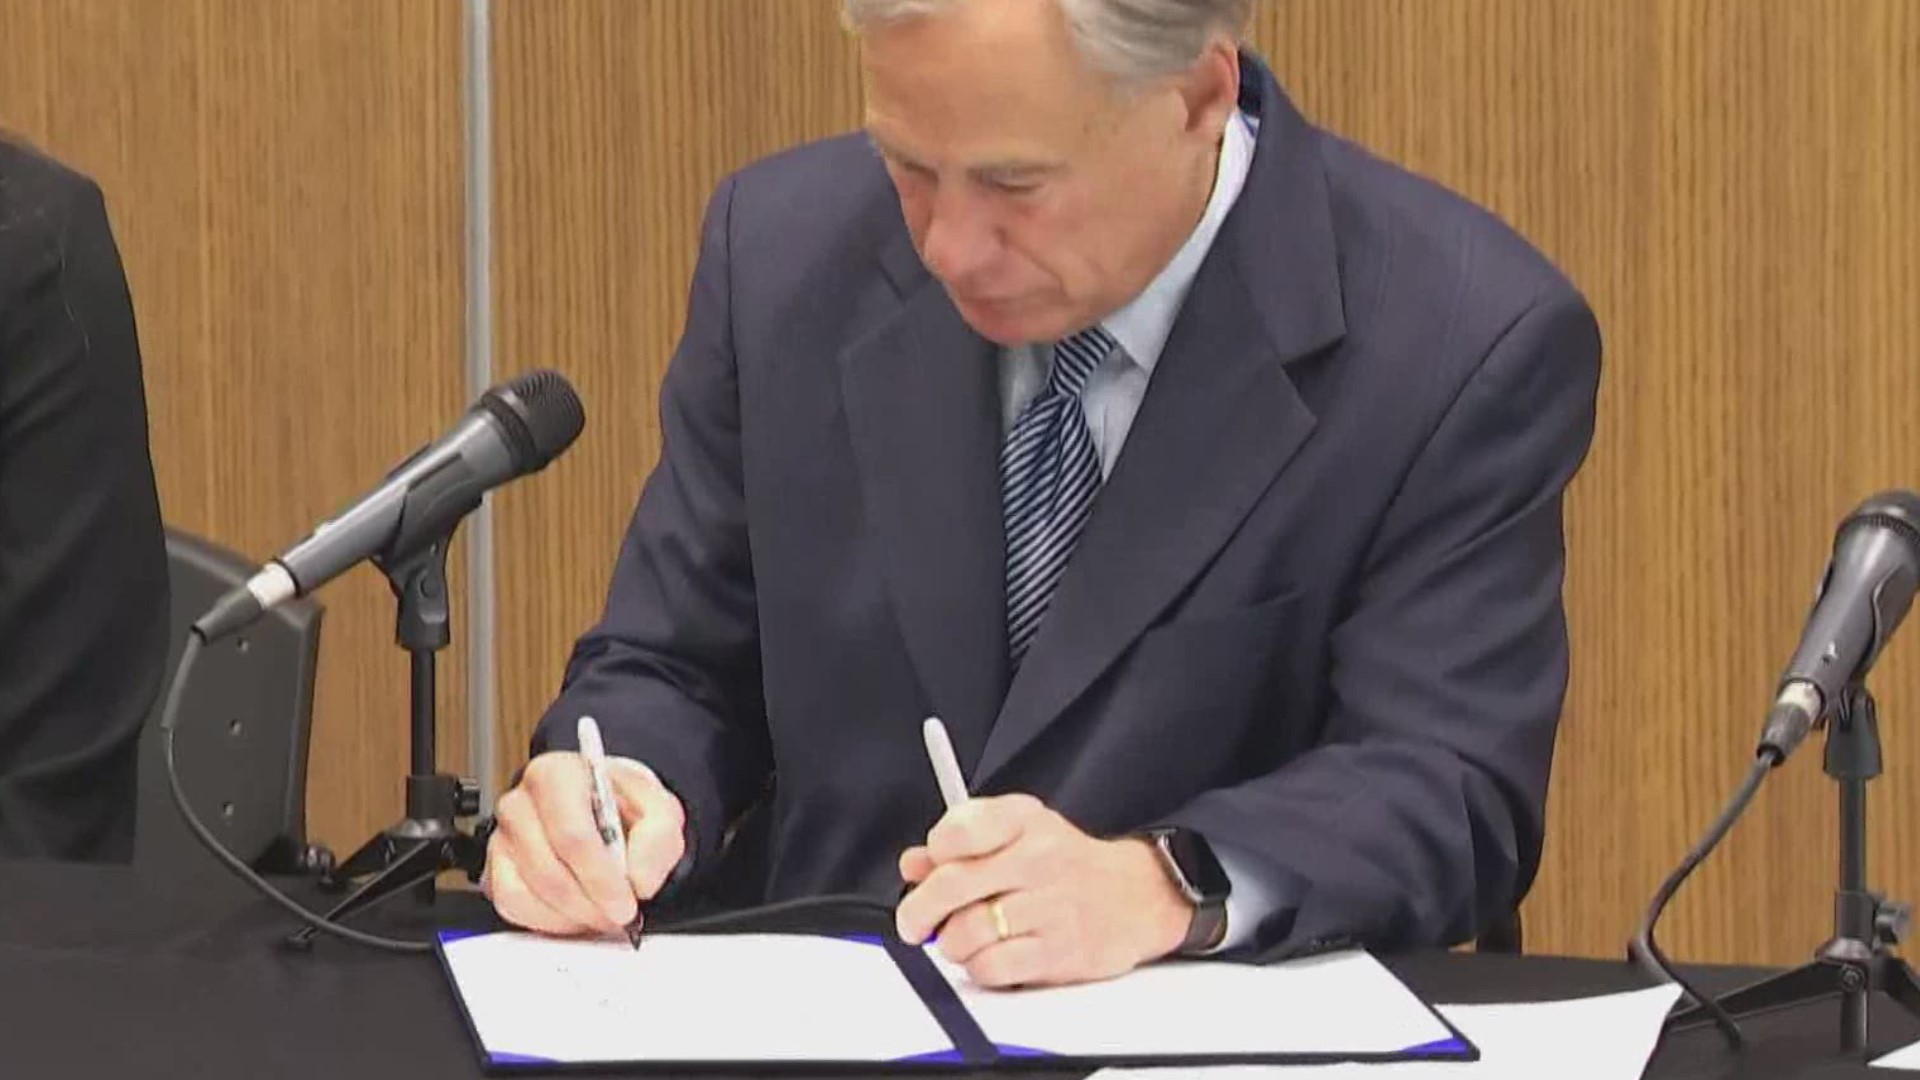 Gov. Greg Abbott ceremoniously signed an a law meant to crack down on illegal production and distribution of fentanyl.